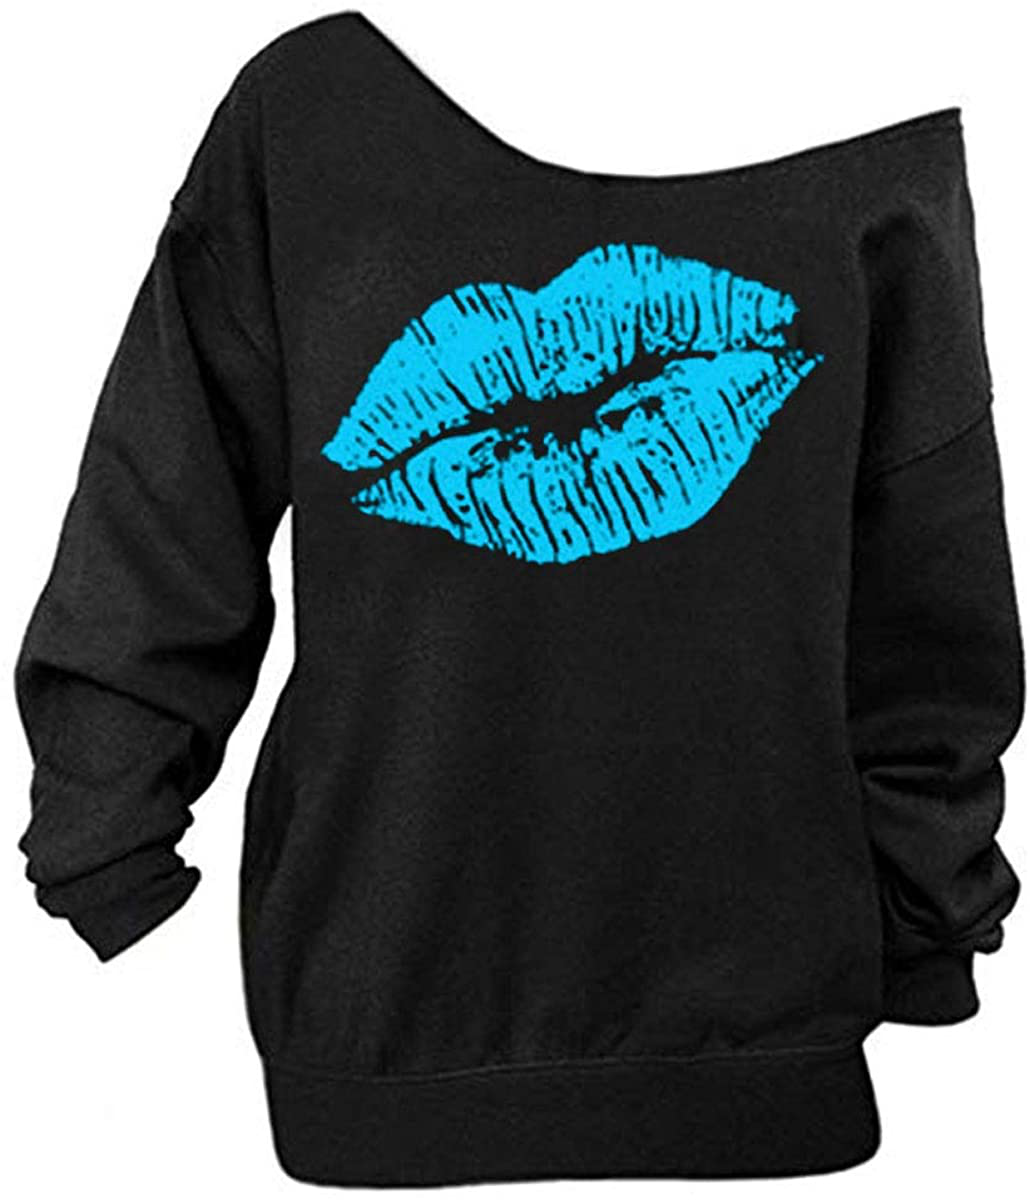 Begonia.K Women's Sweatshirt Lips Print Causal Long Sleeve Off The Shoulder Oversized Slouchy Pullover Plus Size Tops